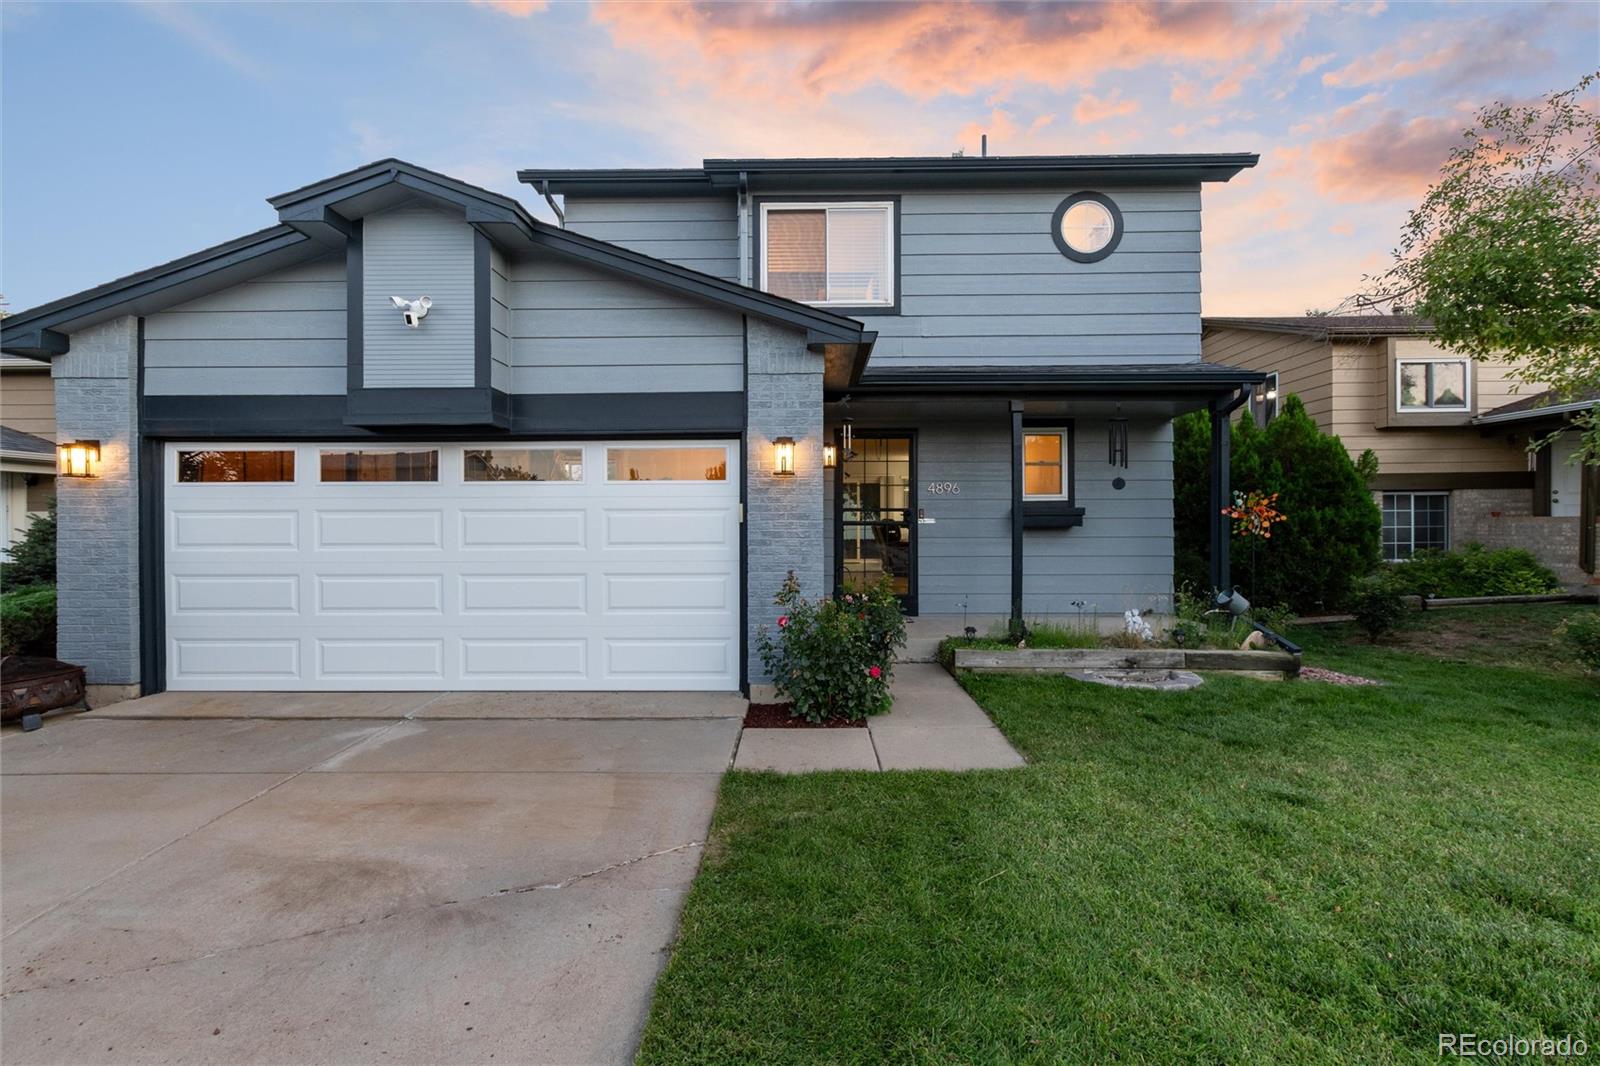 4896 W 61st Place, arvada MLS: 2881095 Beds: 3 Baths: 3 Price: $565,000